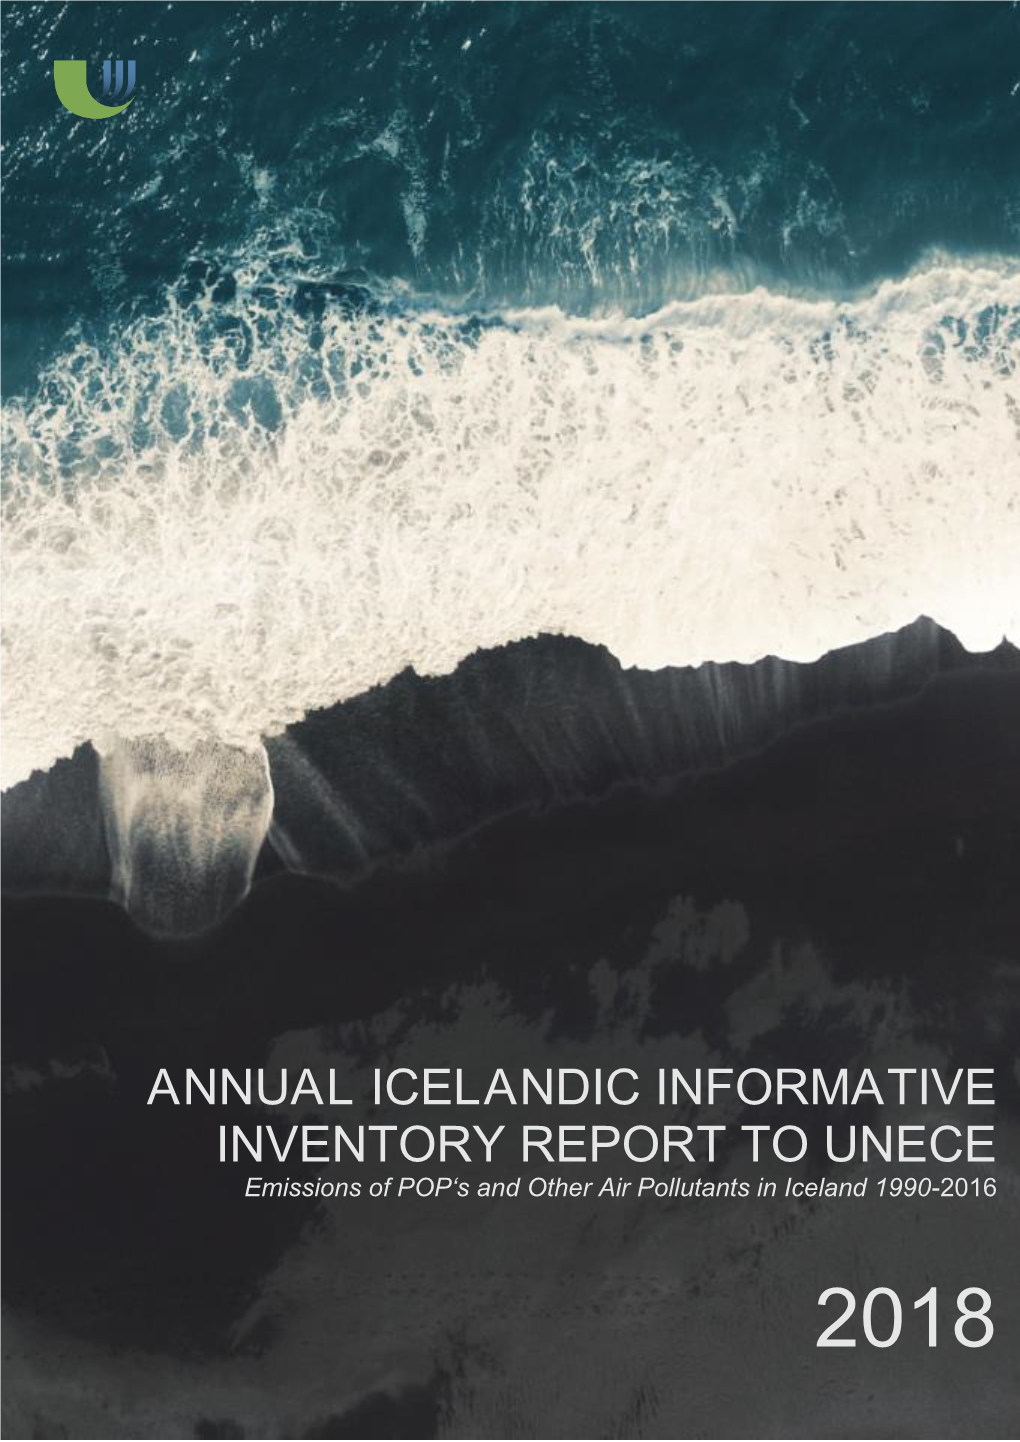 ANNUAL ICELANDIC INFORMATIVE INVENTORY REPORT to UNECE Emissions of POP‘S and Other Air Pollutants in Iceland 1990-2016